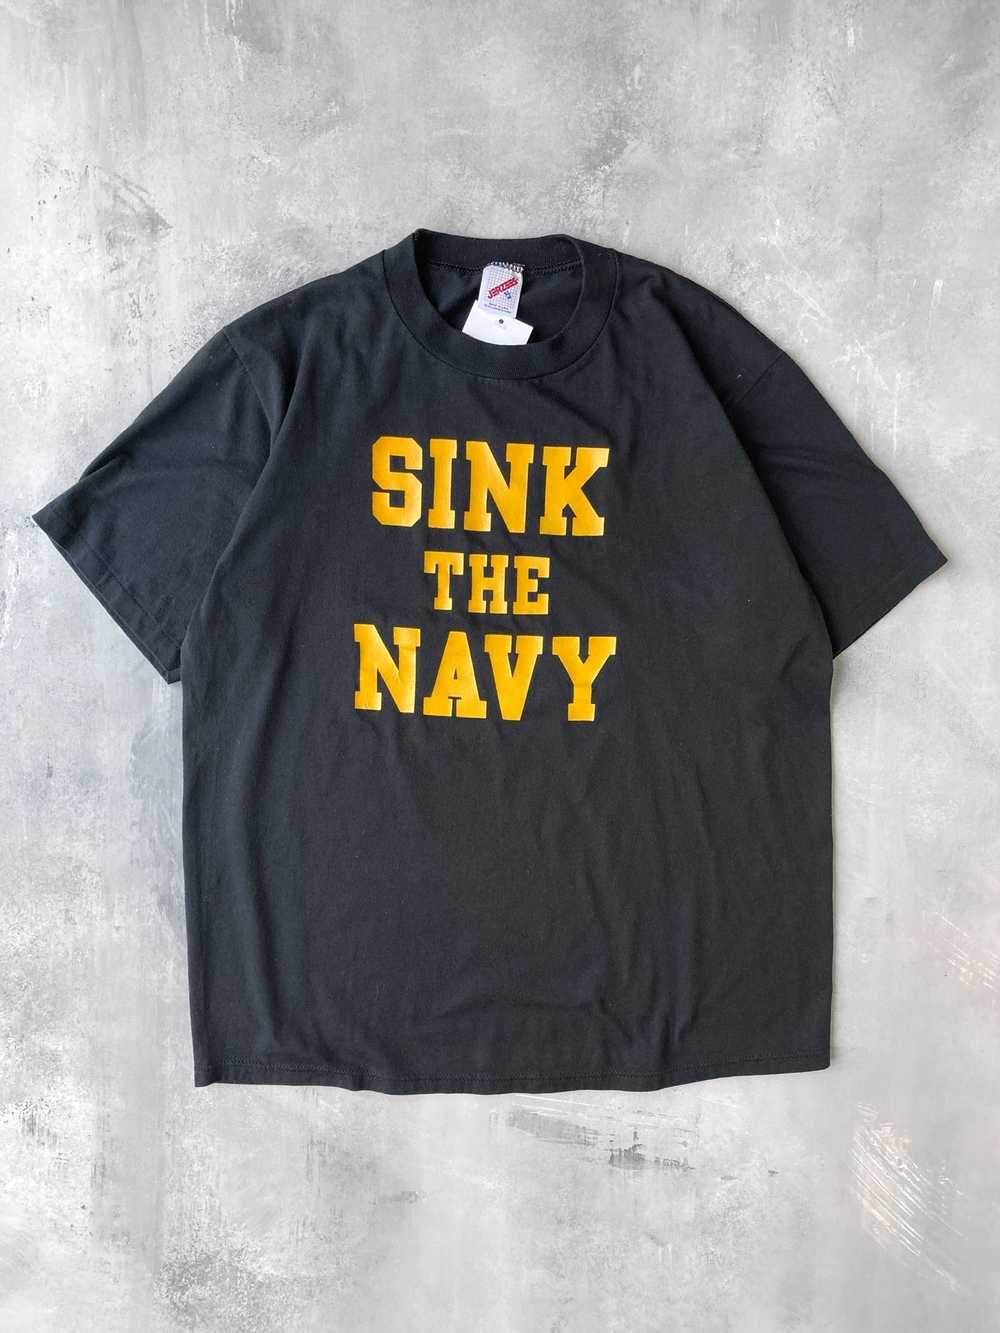 Sink the Navy Army T-Shirt 80's - Large - image 1